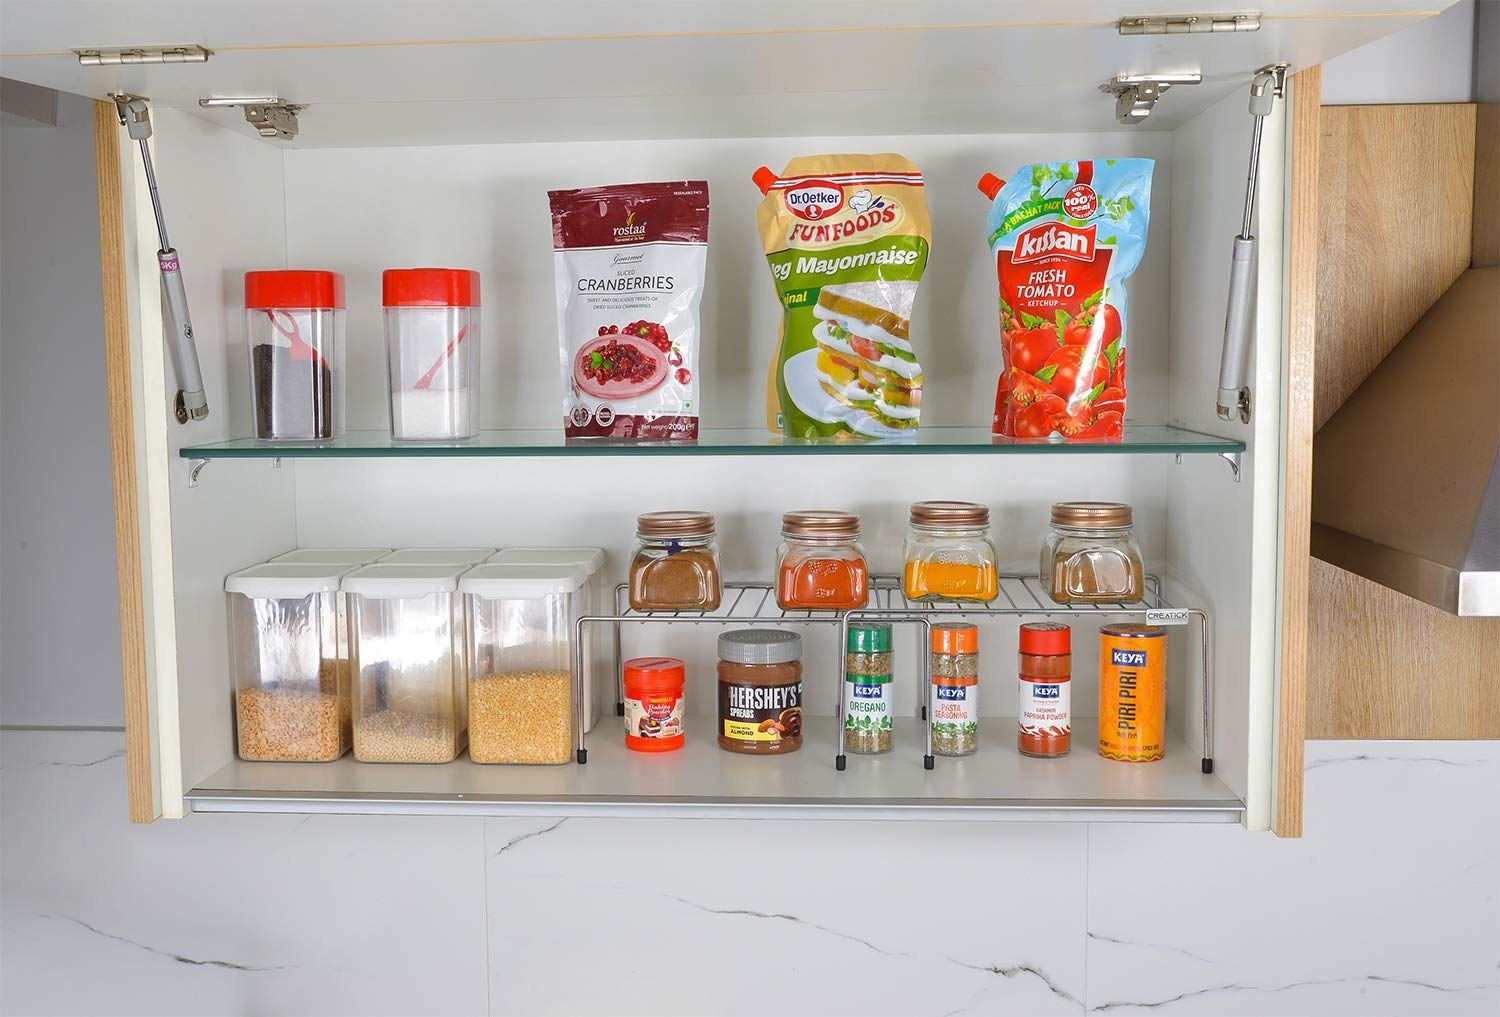 An expandable storage rack with spices, grains in boxes, and some condiments